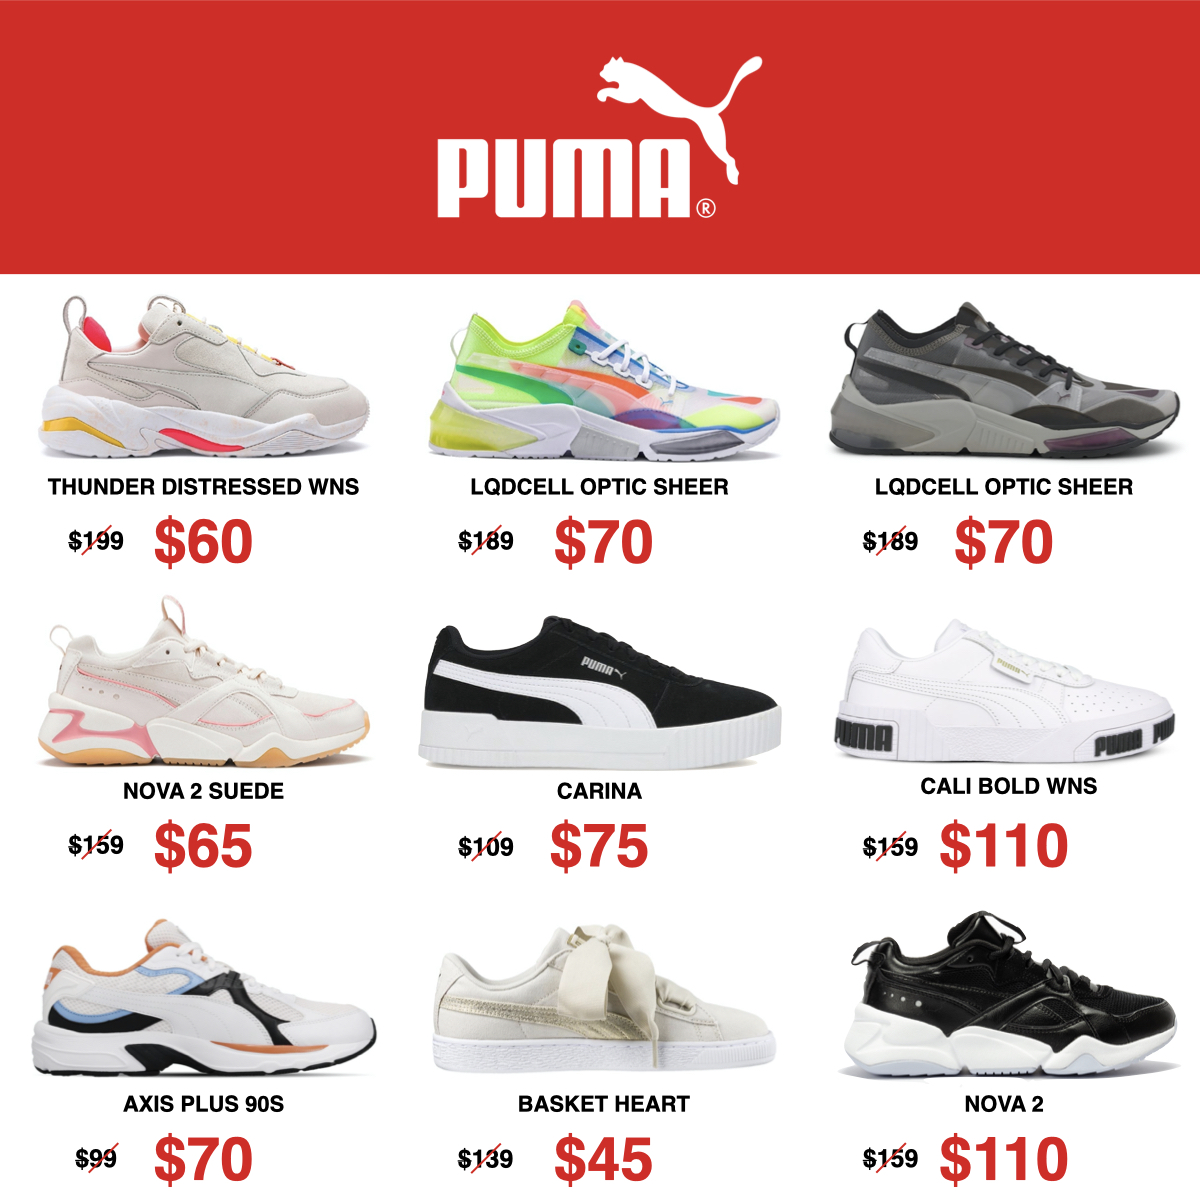 LINK Outlet Sale has up to 80% off branded shoes, bags, accessories & more (30 Jul – 2 Aug 2020) - 3